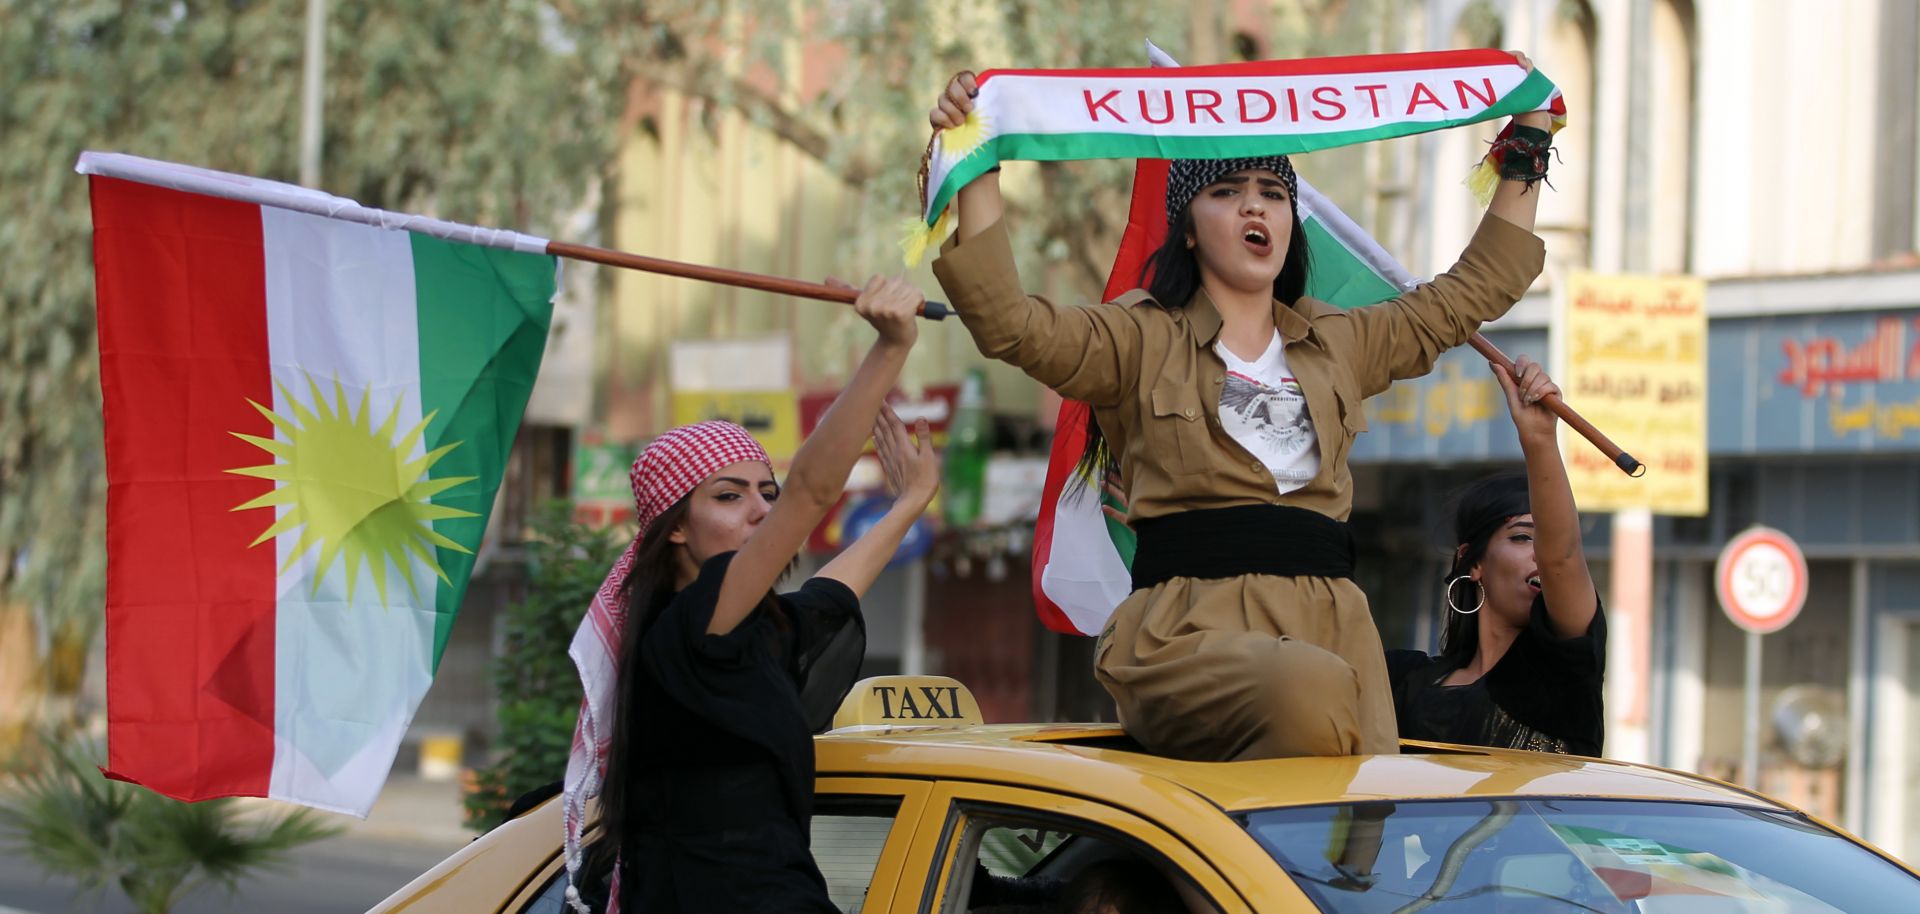 Iraqis Kurdish women celebrate with the Kurdish flag as they ride outside the windows and roof of a taxi in the northern city of Kirkuk, Sept. 25.